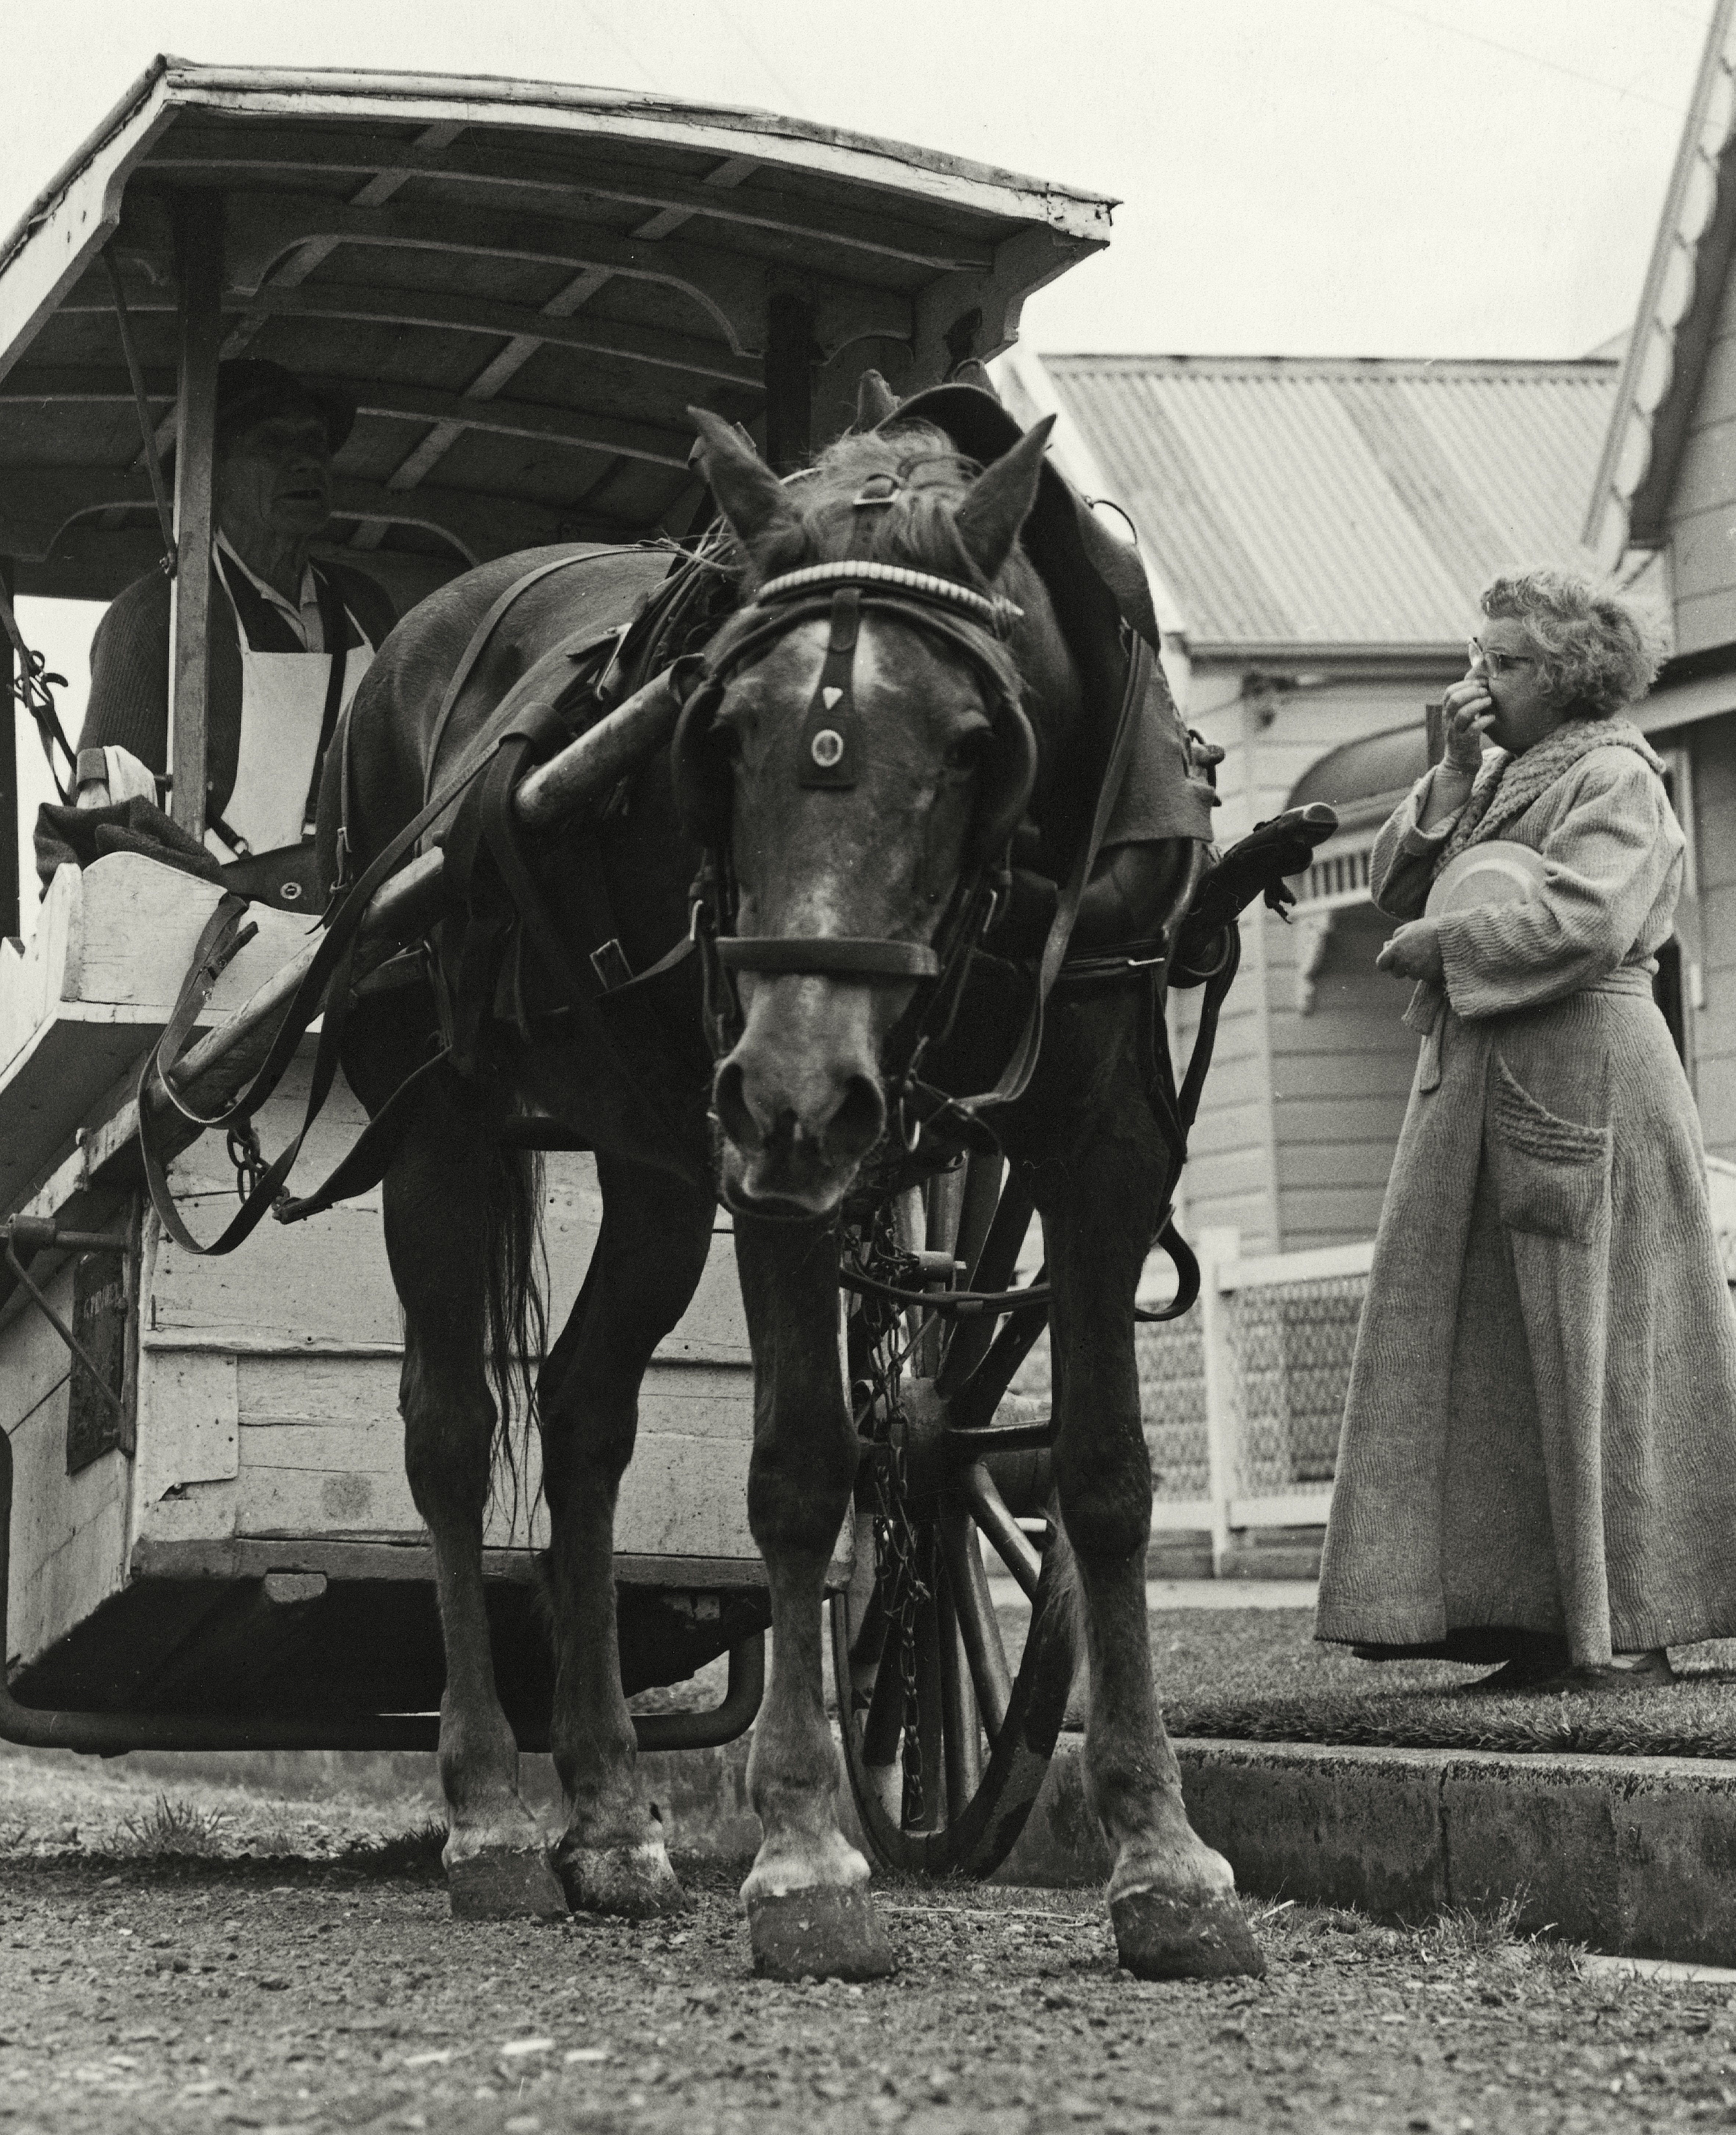 Historical photo of a woman standing next to a horse carriage